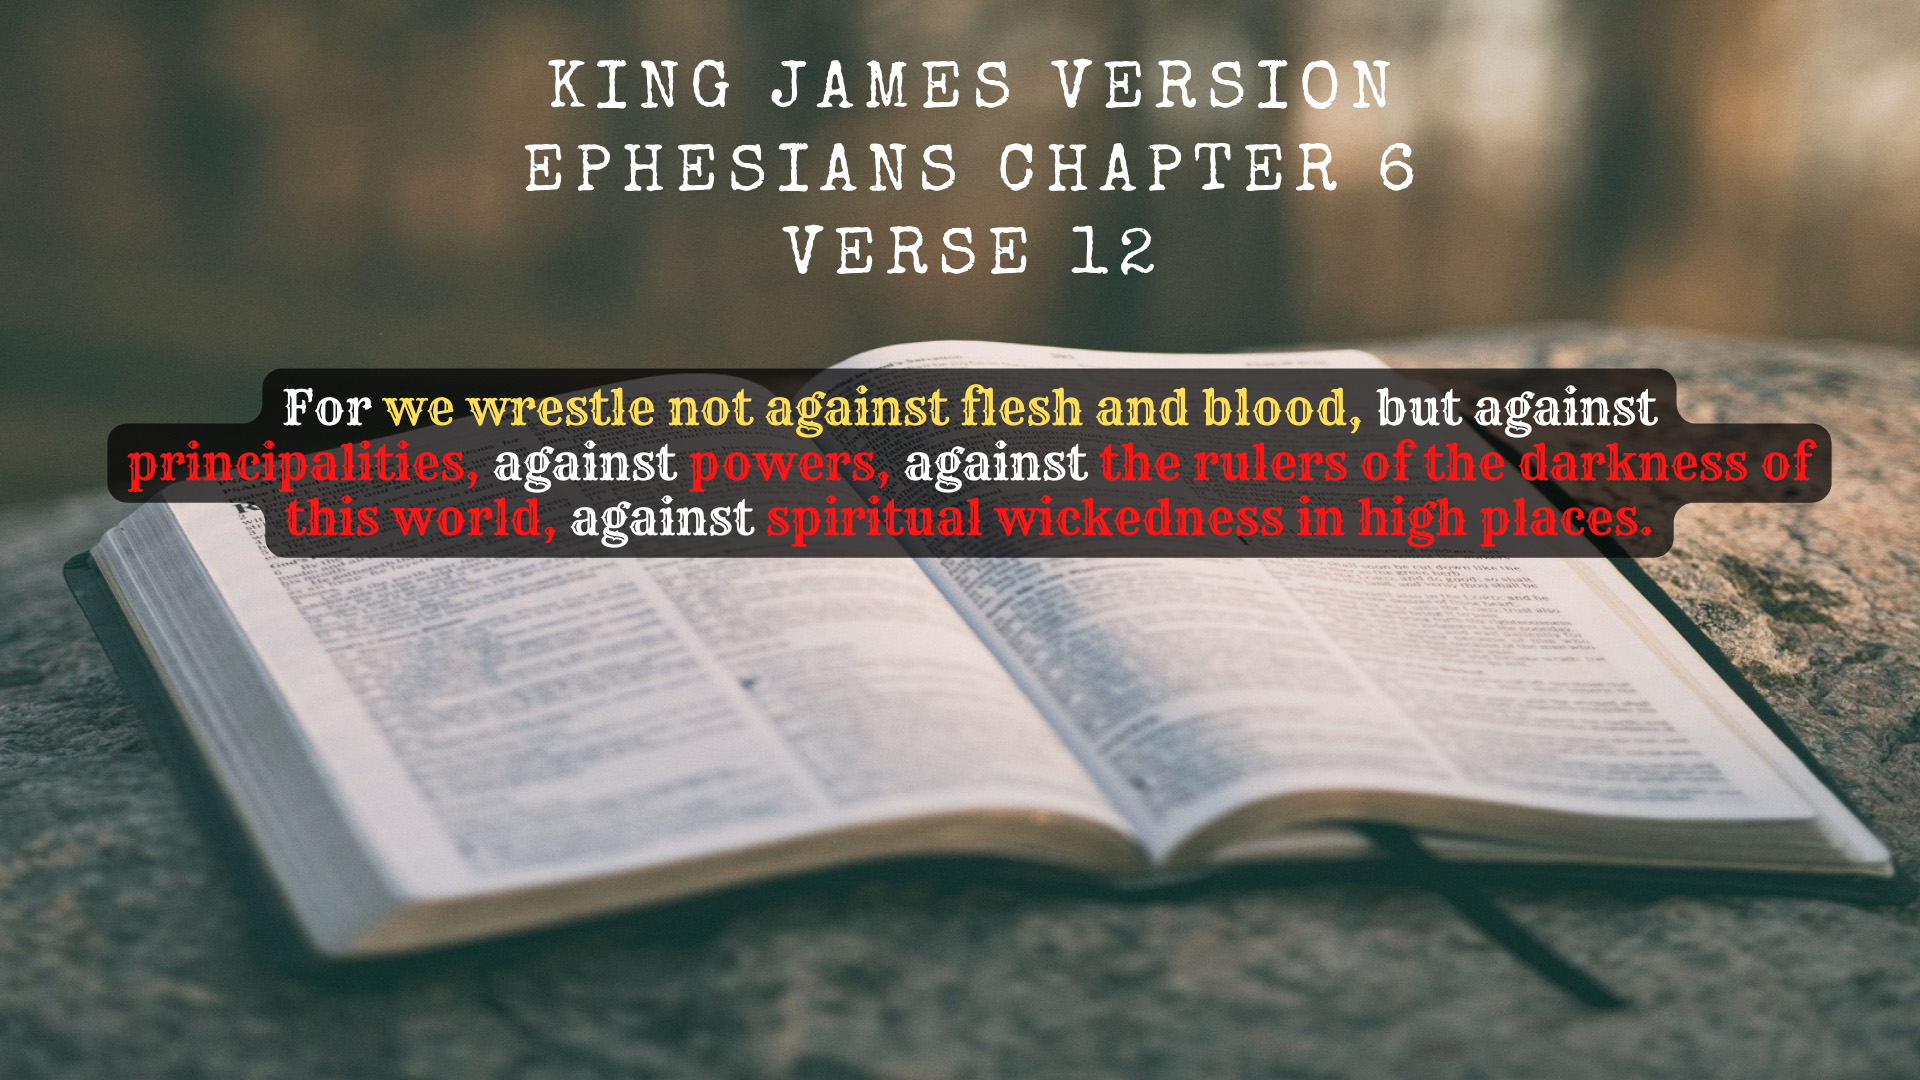 For we wrestle not against flesh and blood, but against principalities, against powers, against the rulers of the darkness of this world, against spiritual wickedness in high places.